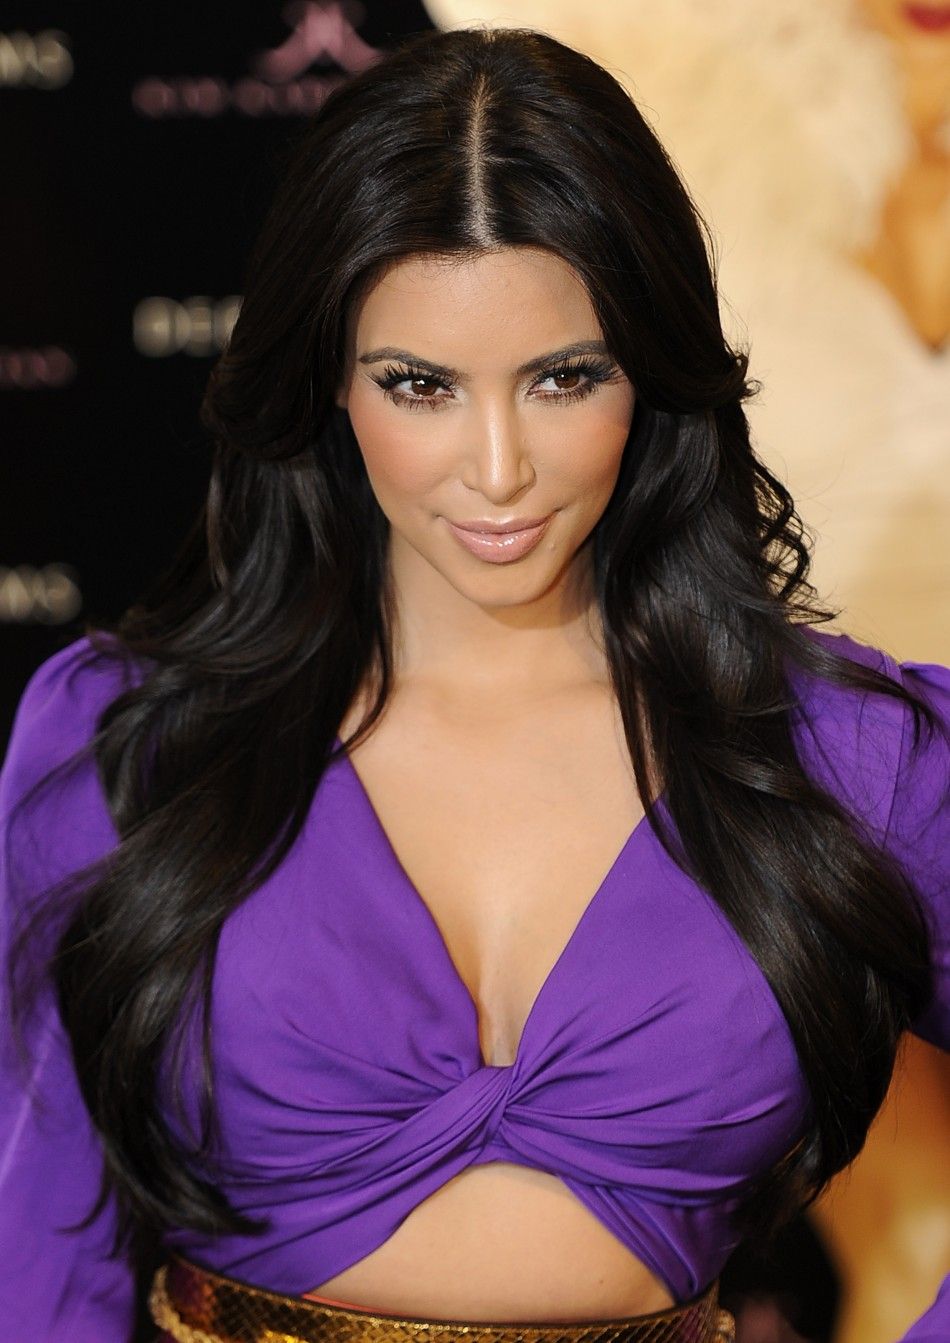 U.S. television celebrity Kim Kardashian poses for photographers as she launches her perfume at a store in central London June 8, 2011